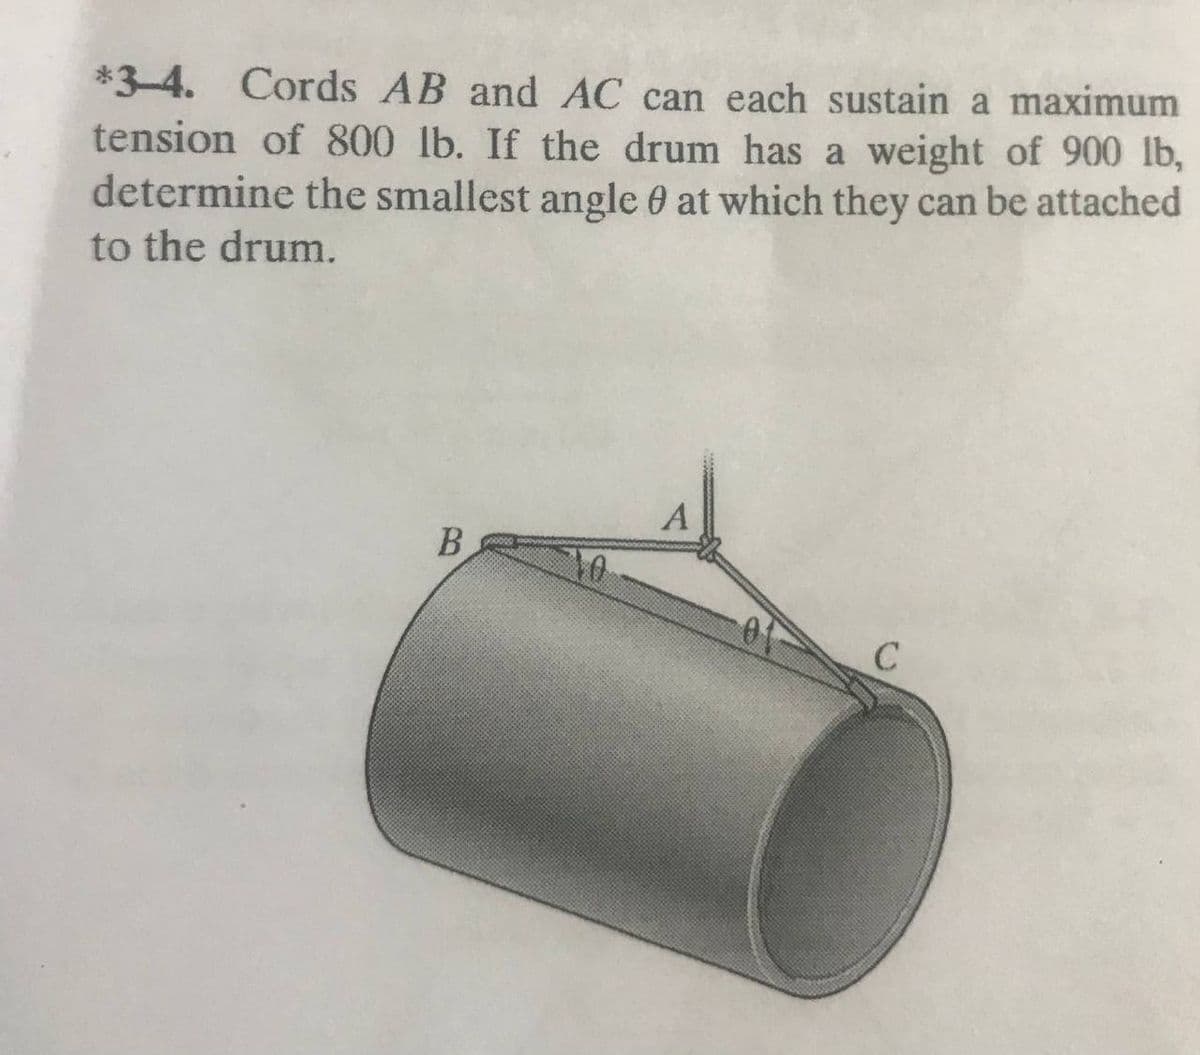 *3-4. Cords AB and AC can each sustain a maximum
tension of 800 lb. If the drum has a weight of 900 lb,
determine the smallest angle 0 at which they can be attached
to the drum.
B.
10
